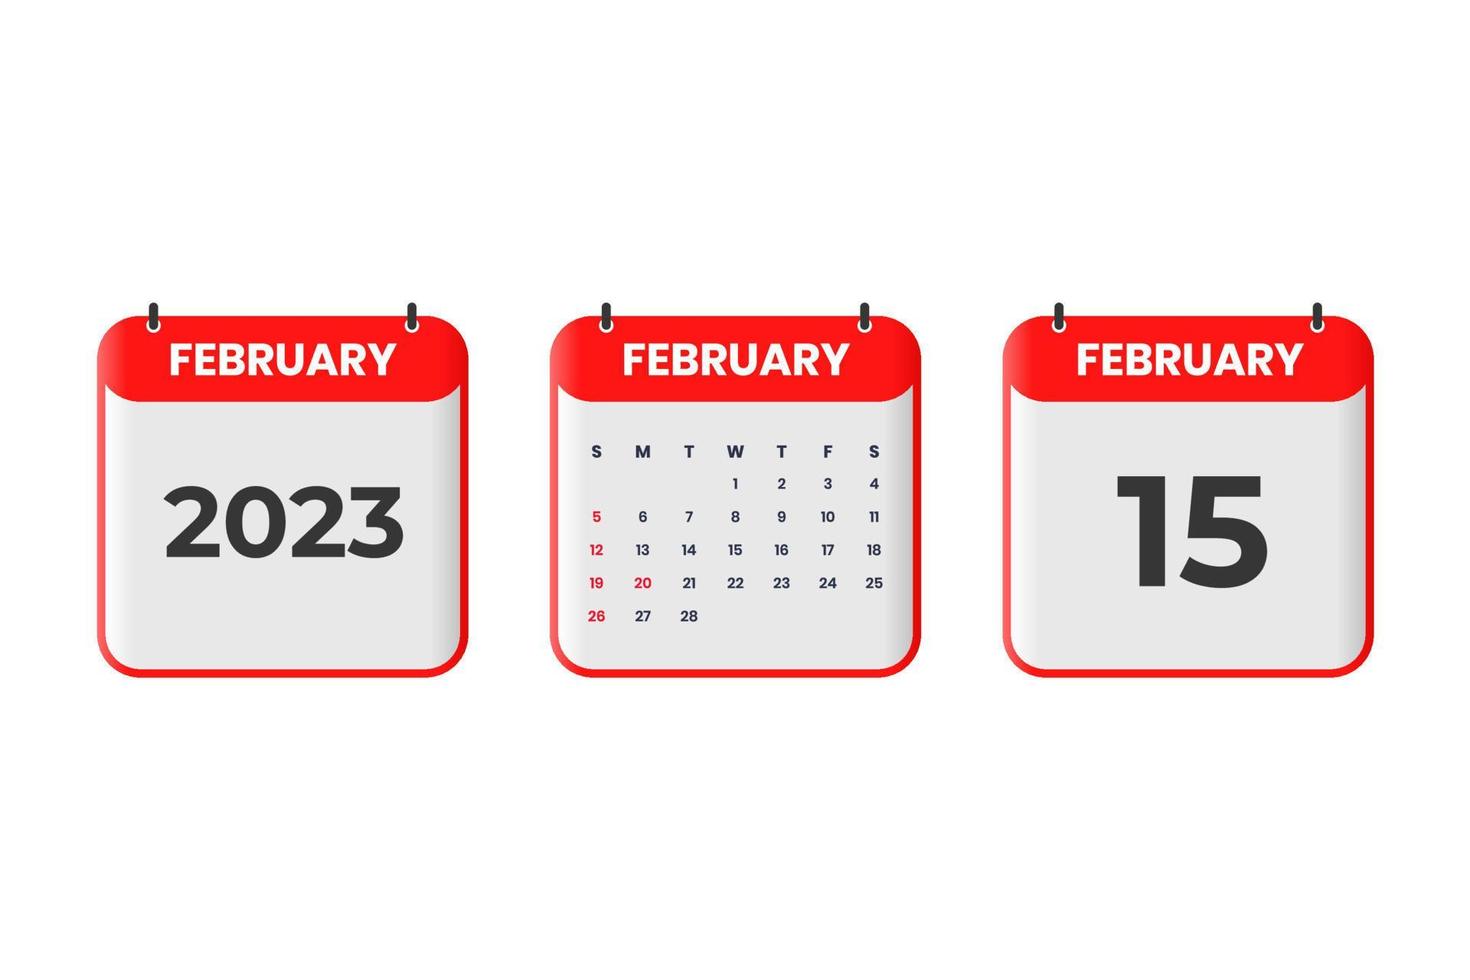 February 2023 calendar design. 15th February 2023 calendar icon for schedule, appointment, important date concept vector